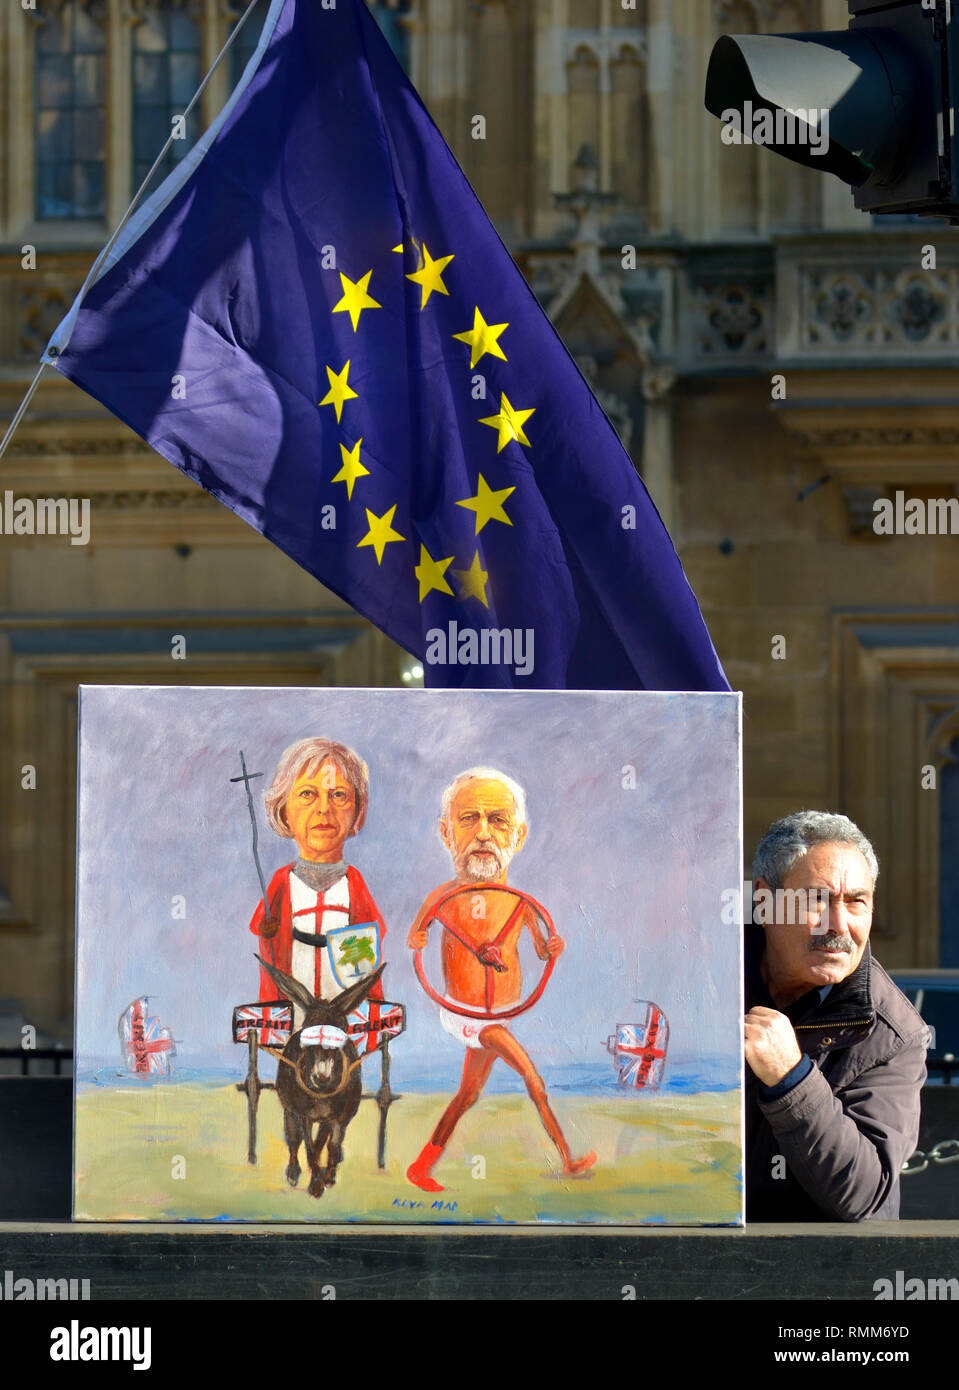 Kaya Mar - Turkish political cartoonist - with his new Brexit painting of PM Theresa May and Jeremy Corbyn. 14th Feb 2019 Stock Photo